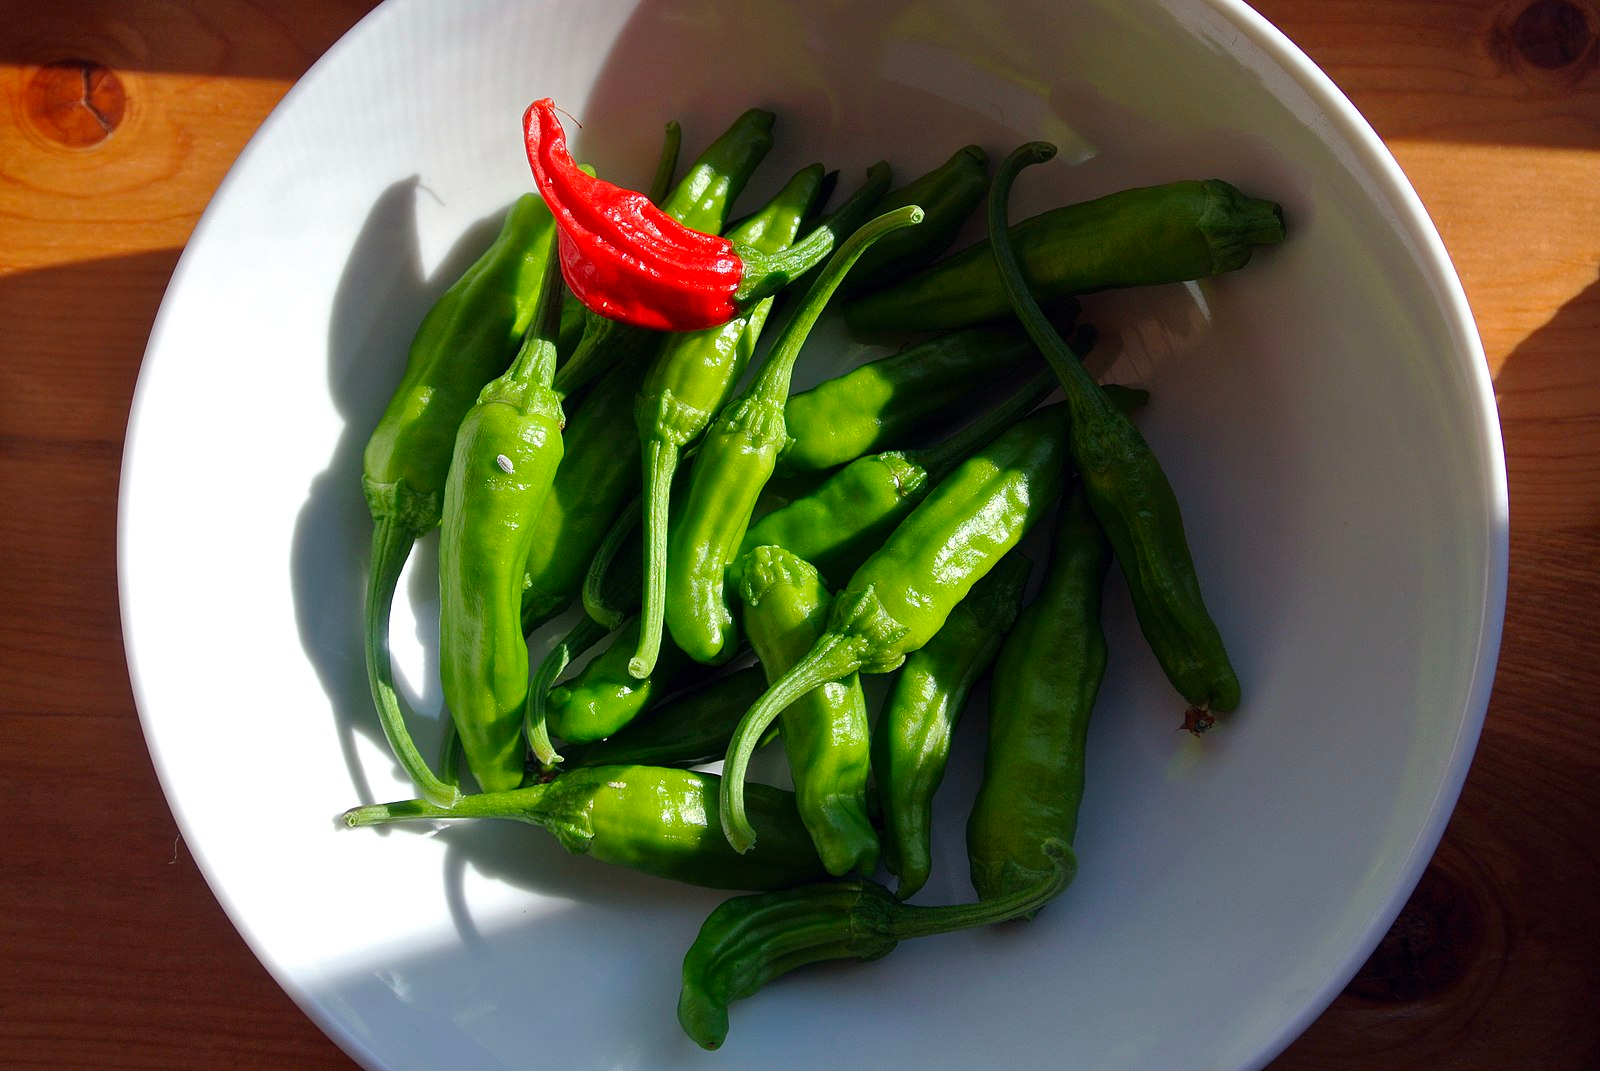 Green shishito peppers and one red shishito pepper in a white bowl on a wooden background